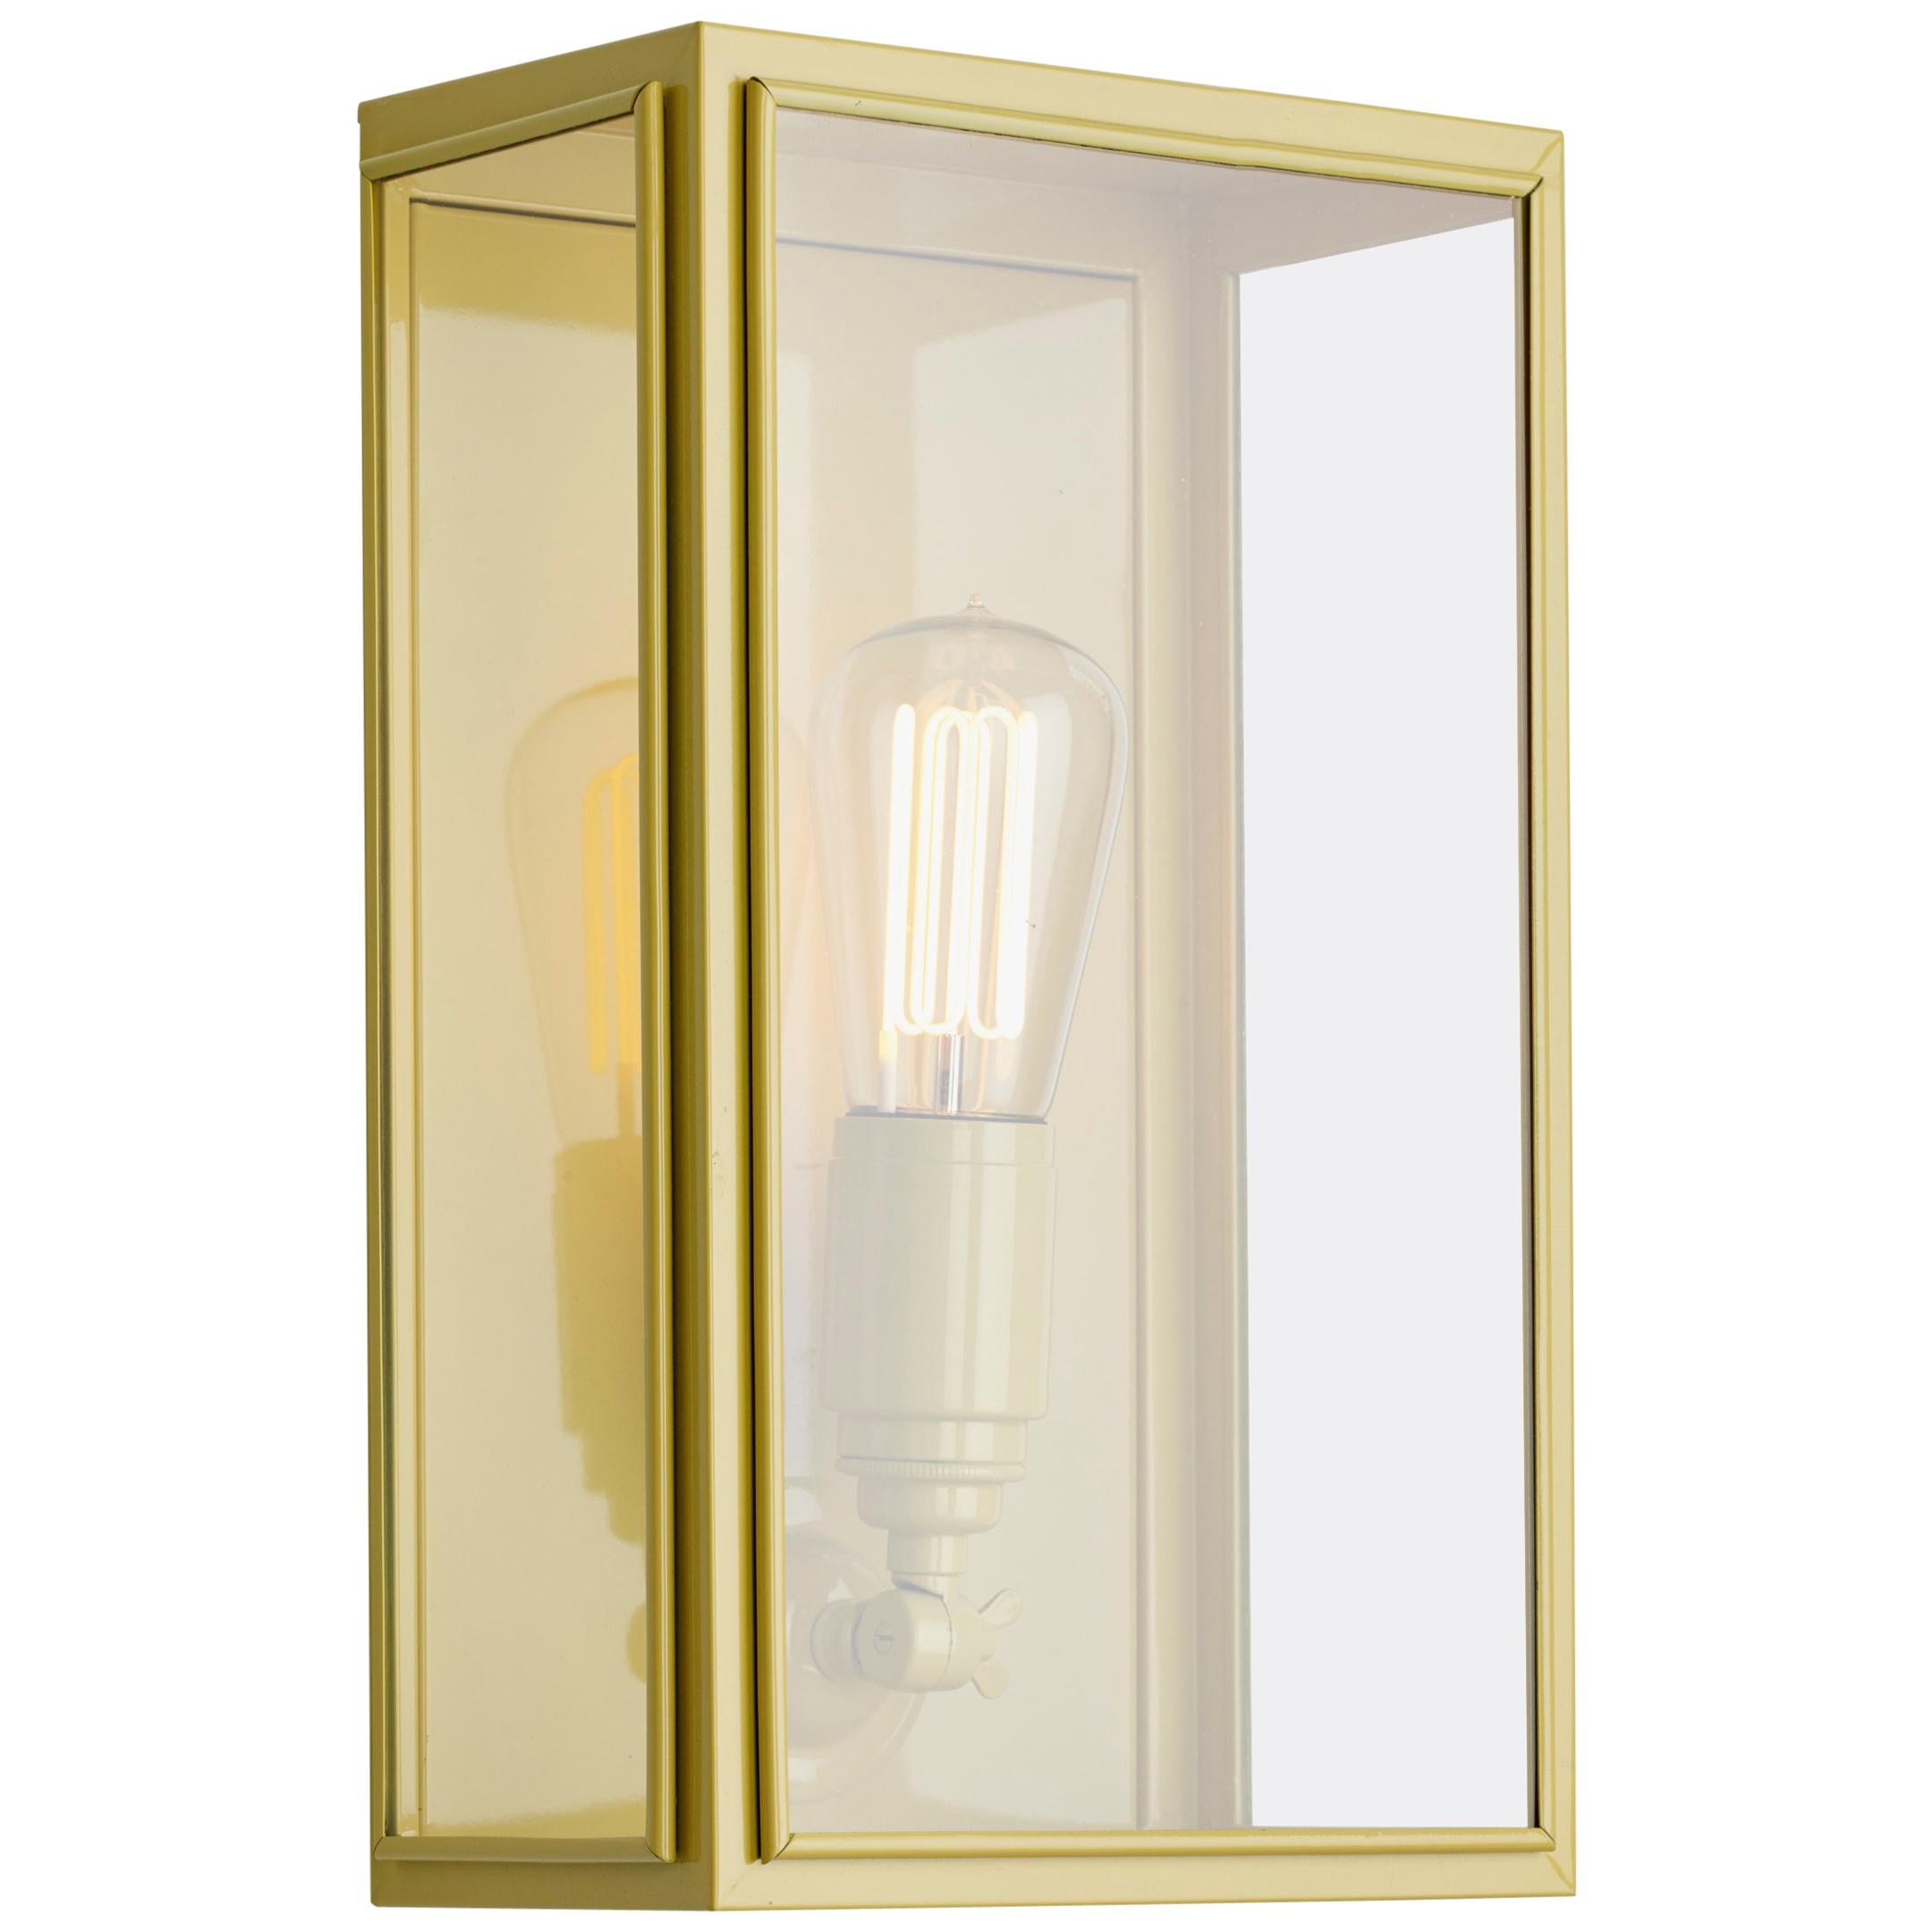 Tekna Essex-C Wall Light in Maize Yellow For Sale